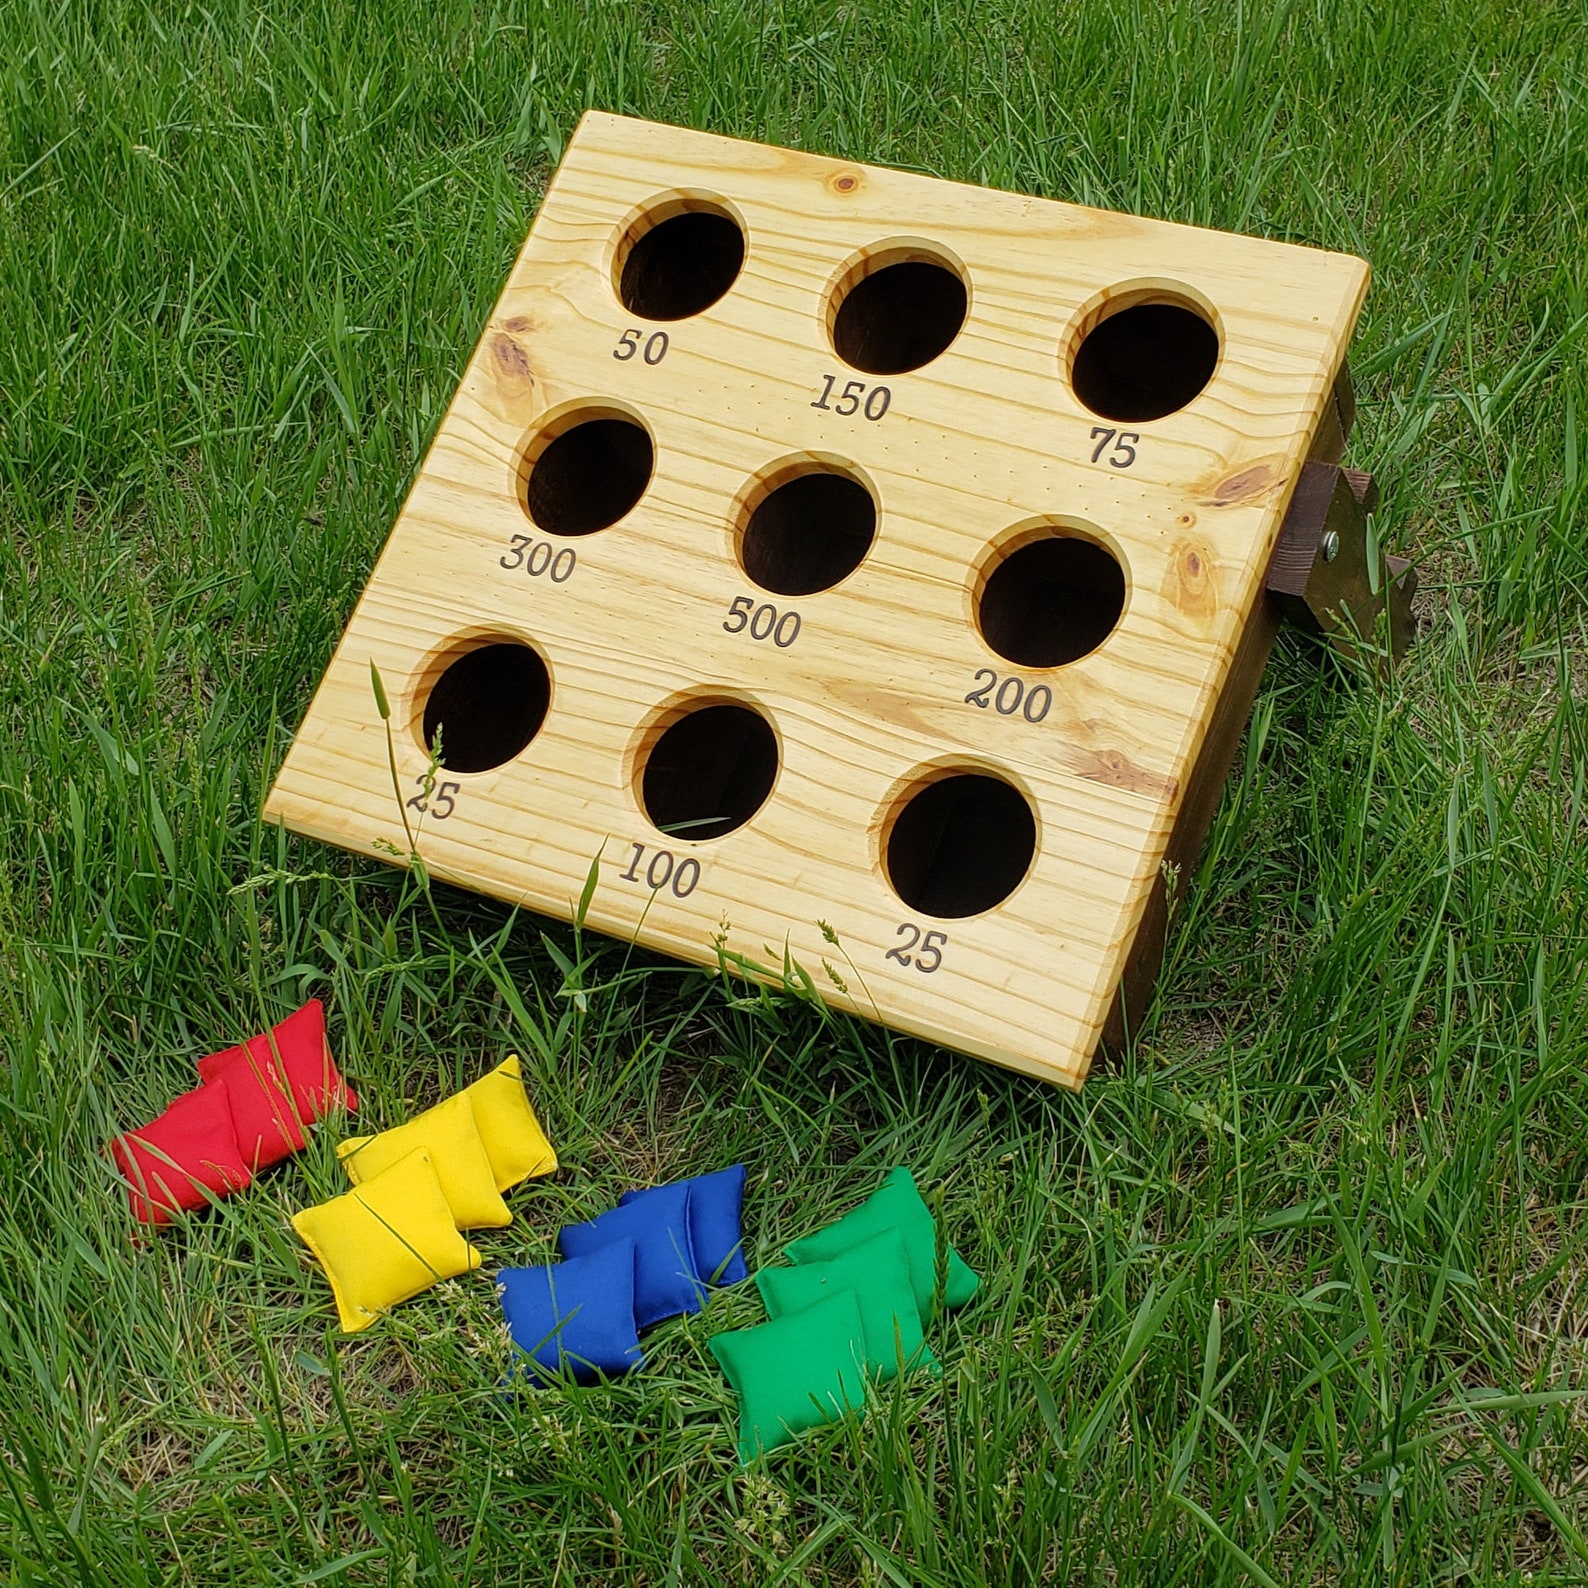 Bean Bag Toss Lawn Game, Mini Corn Hole Game, Wooden Yard Game, Outdoor ...